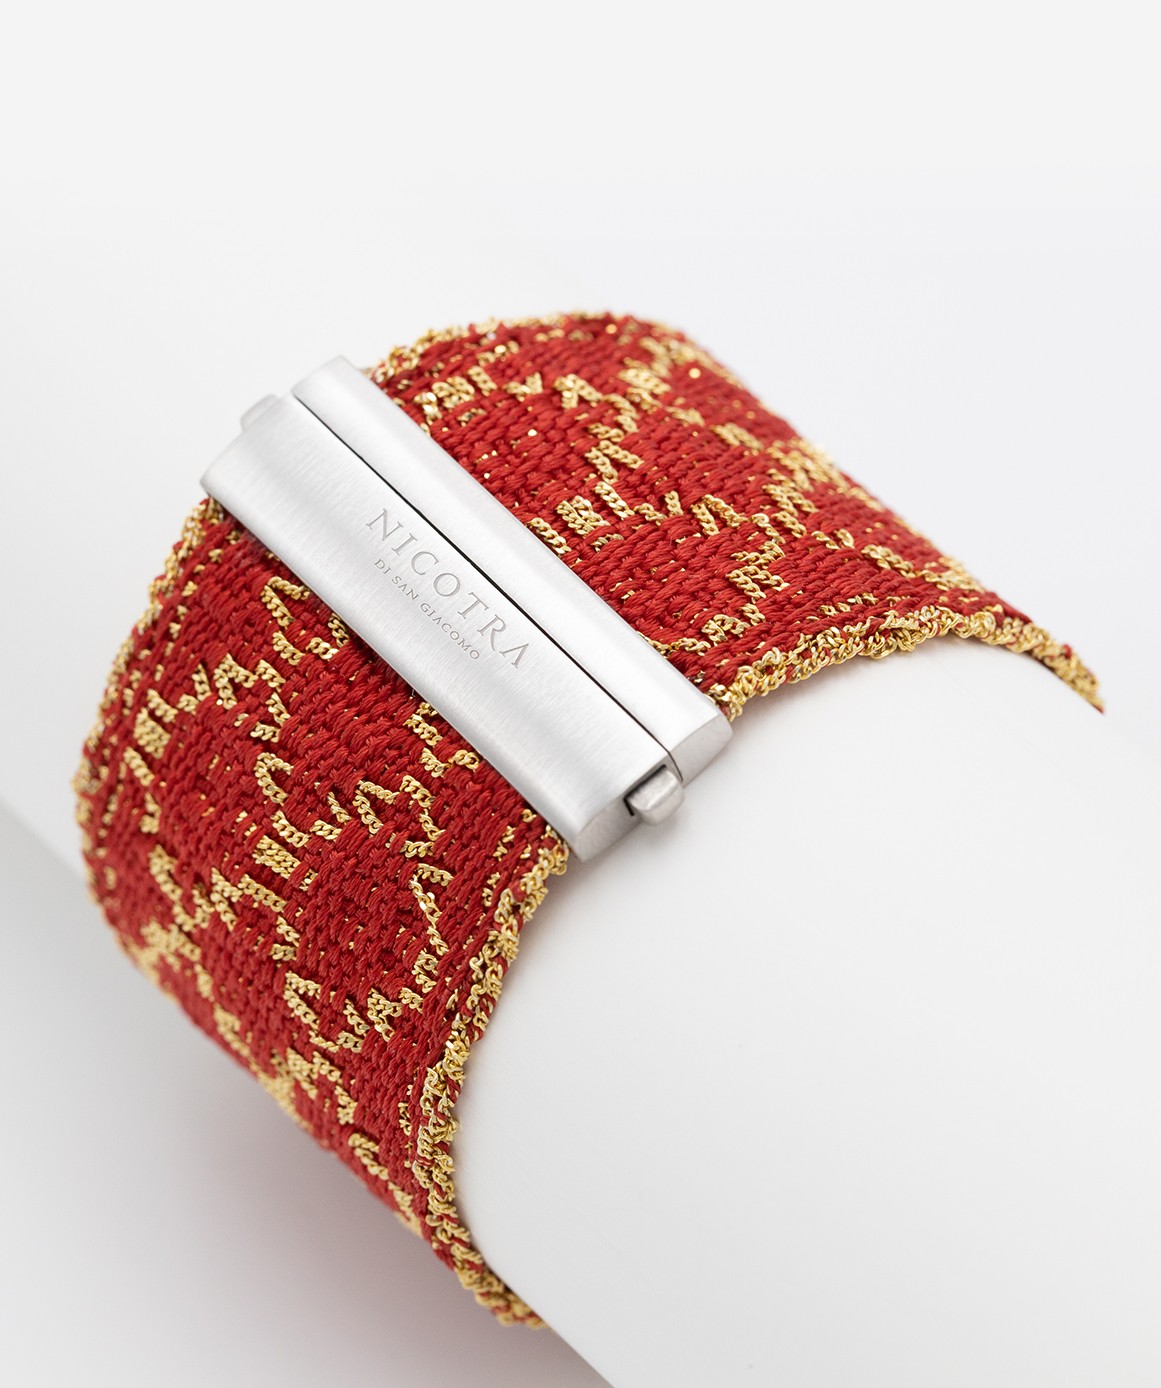 RHOMBUS Bracelet in Sterling Silver 18Kt. Gold plated. Fabric: Silk Red